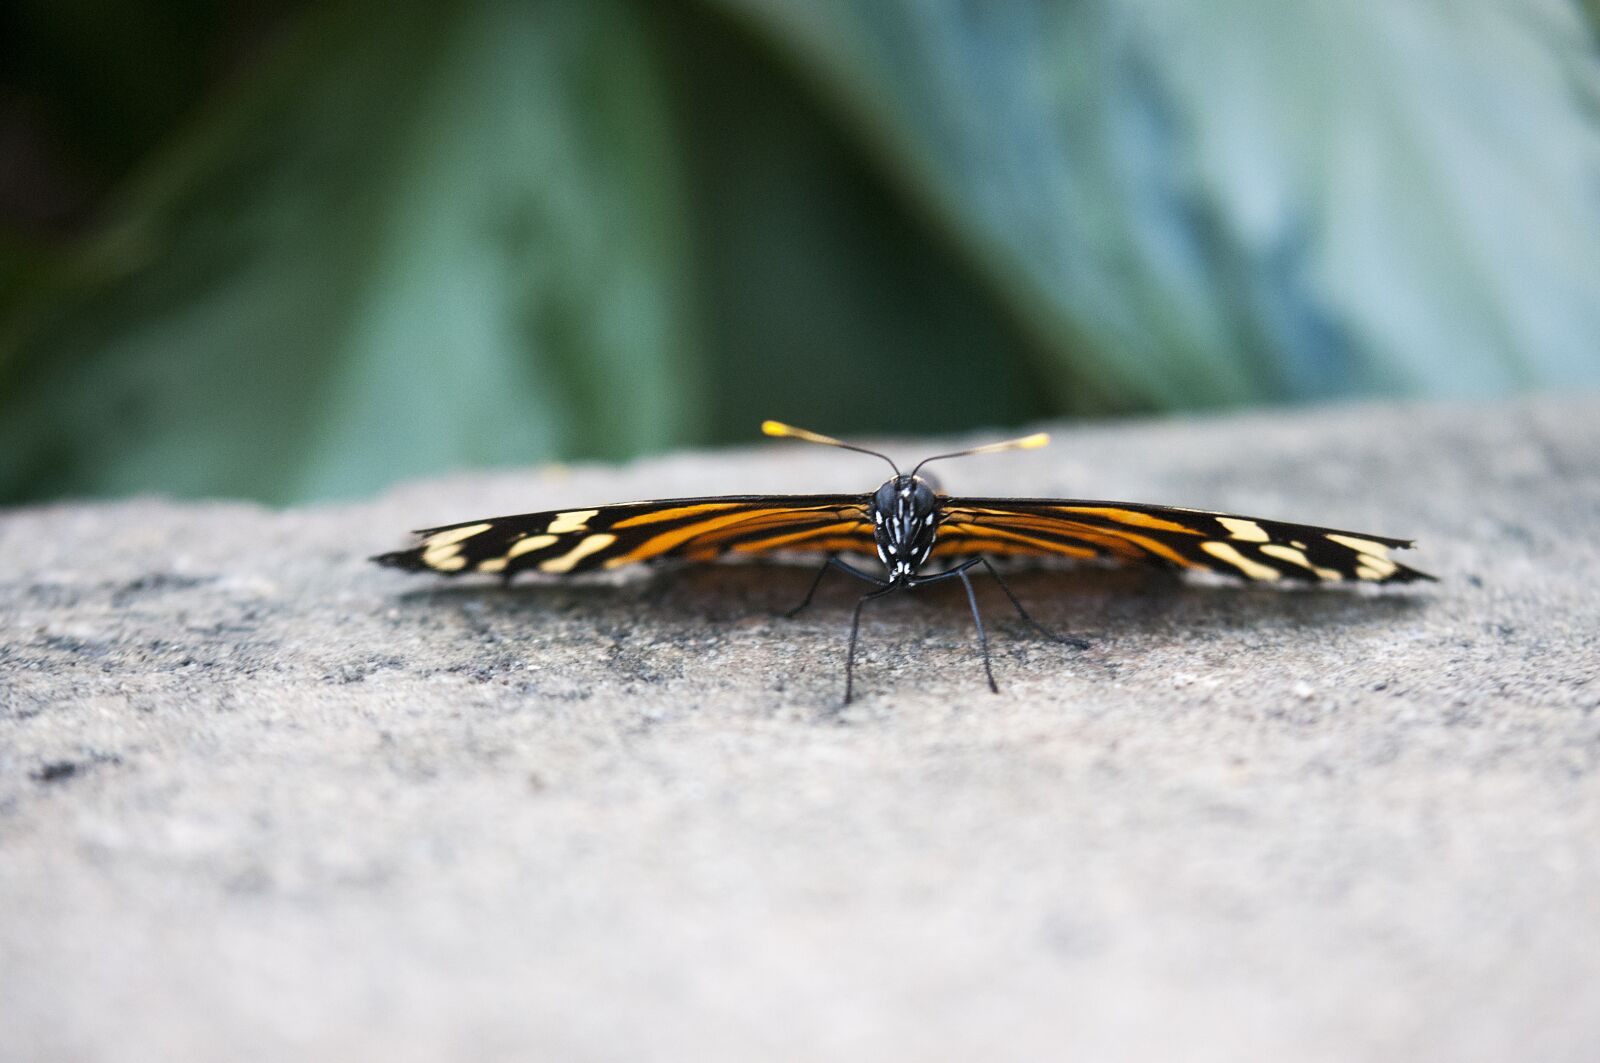 Nikon D300 sample photo. Butterfly, insect, nature photography